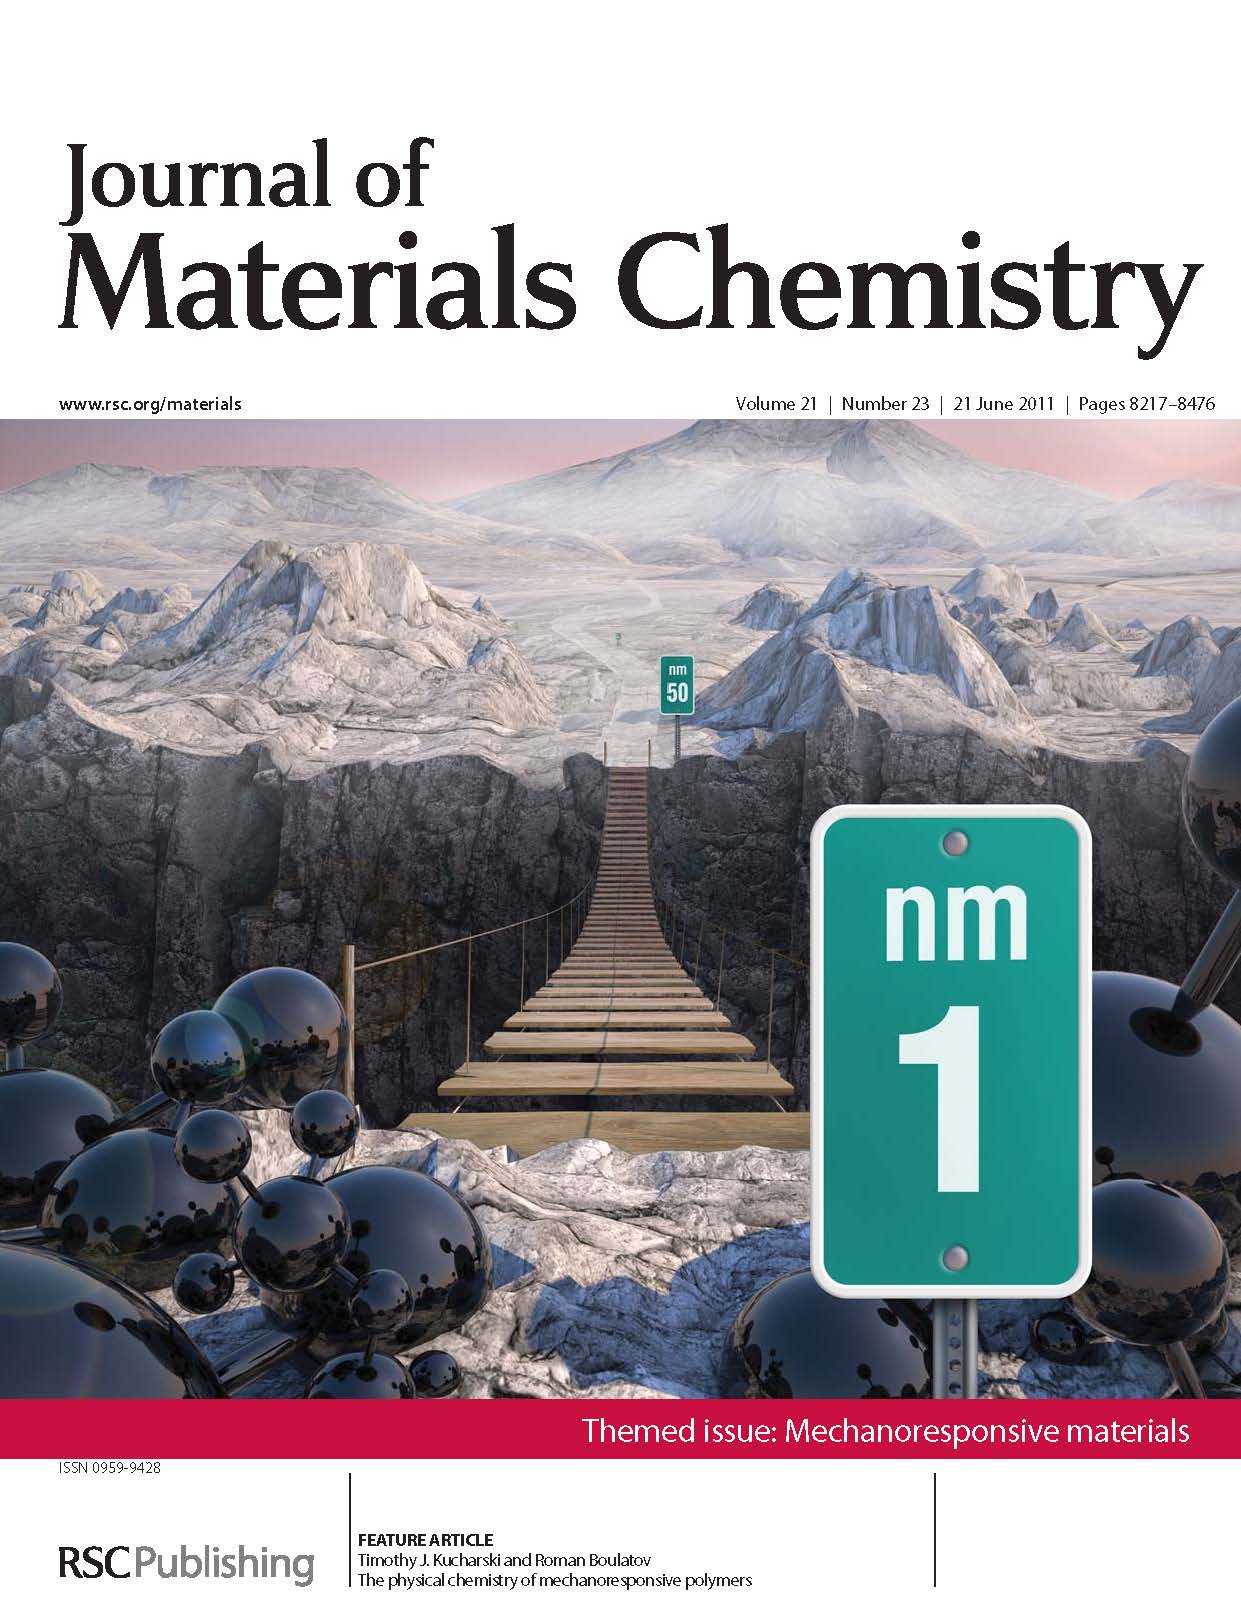 Journal of Materials Chemistry June 2011 Cover